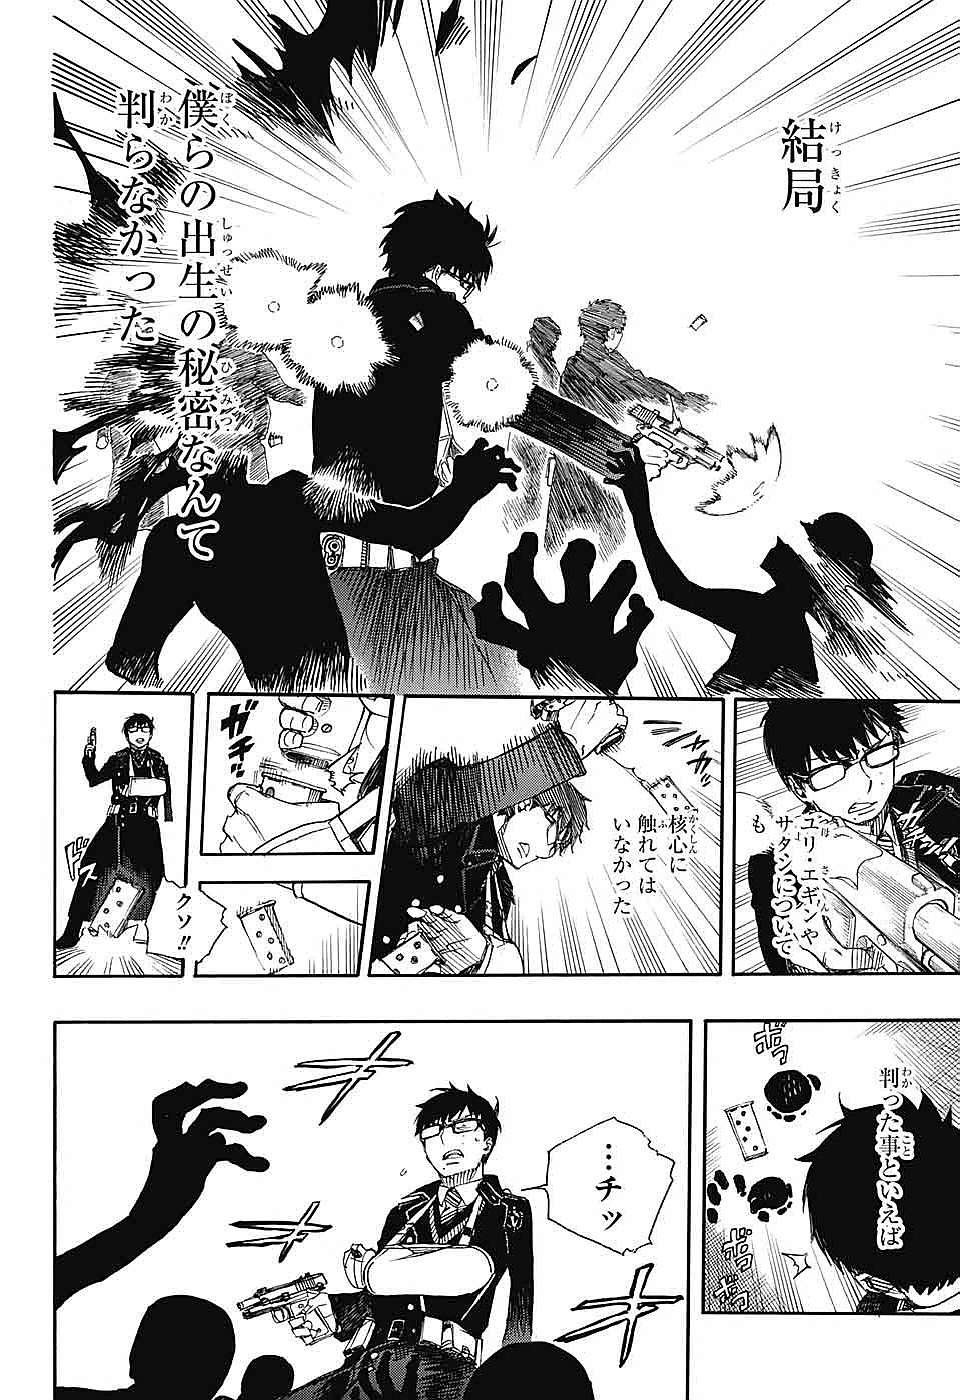 Ao no Exorcist - Chapter 93 - Page 4